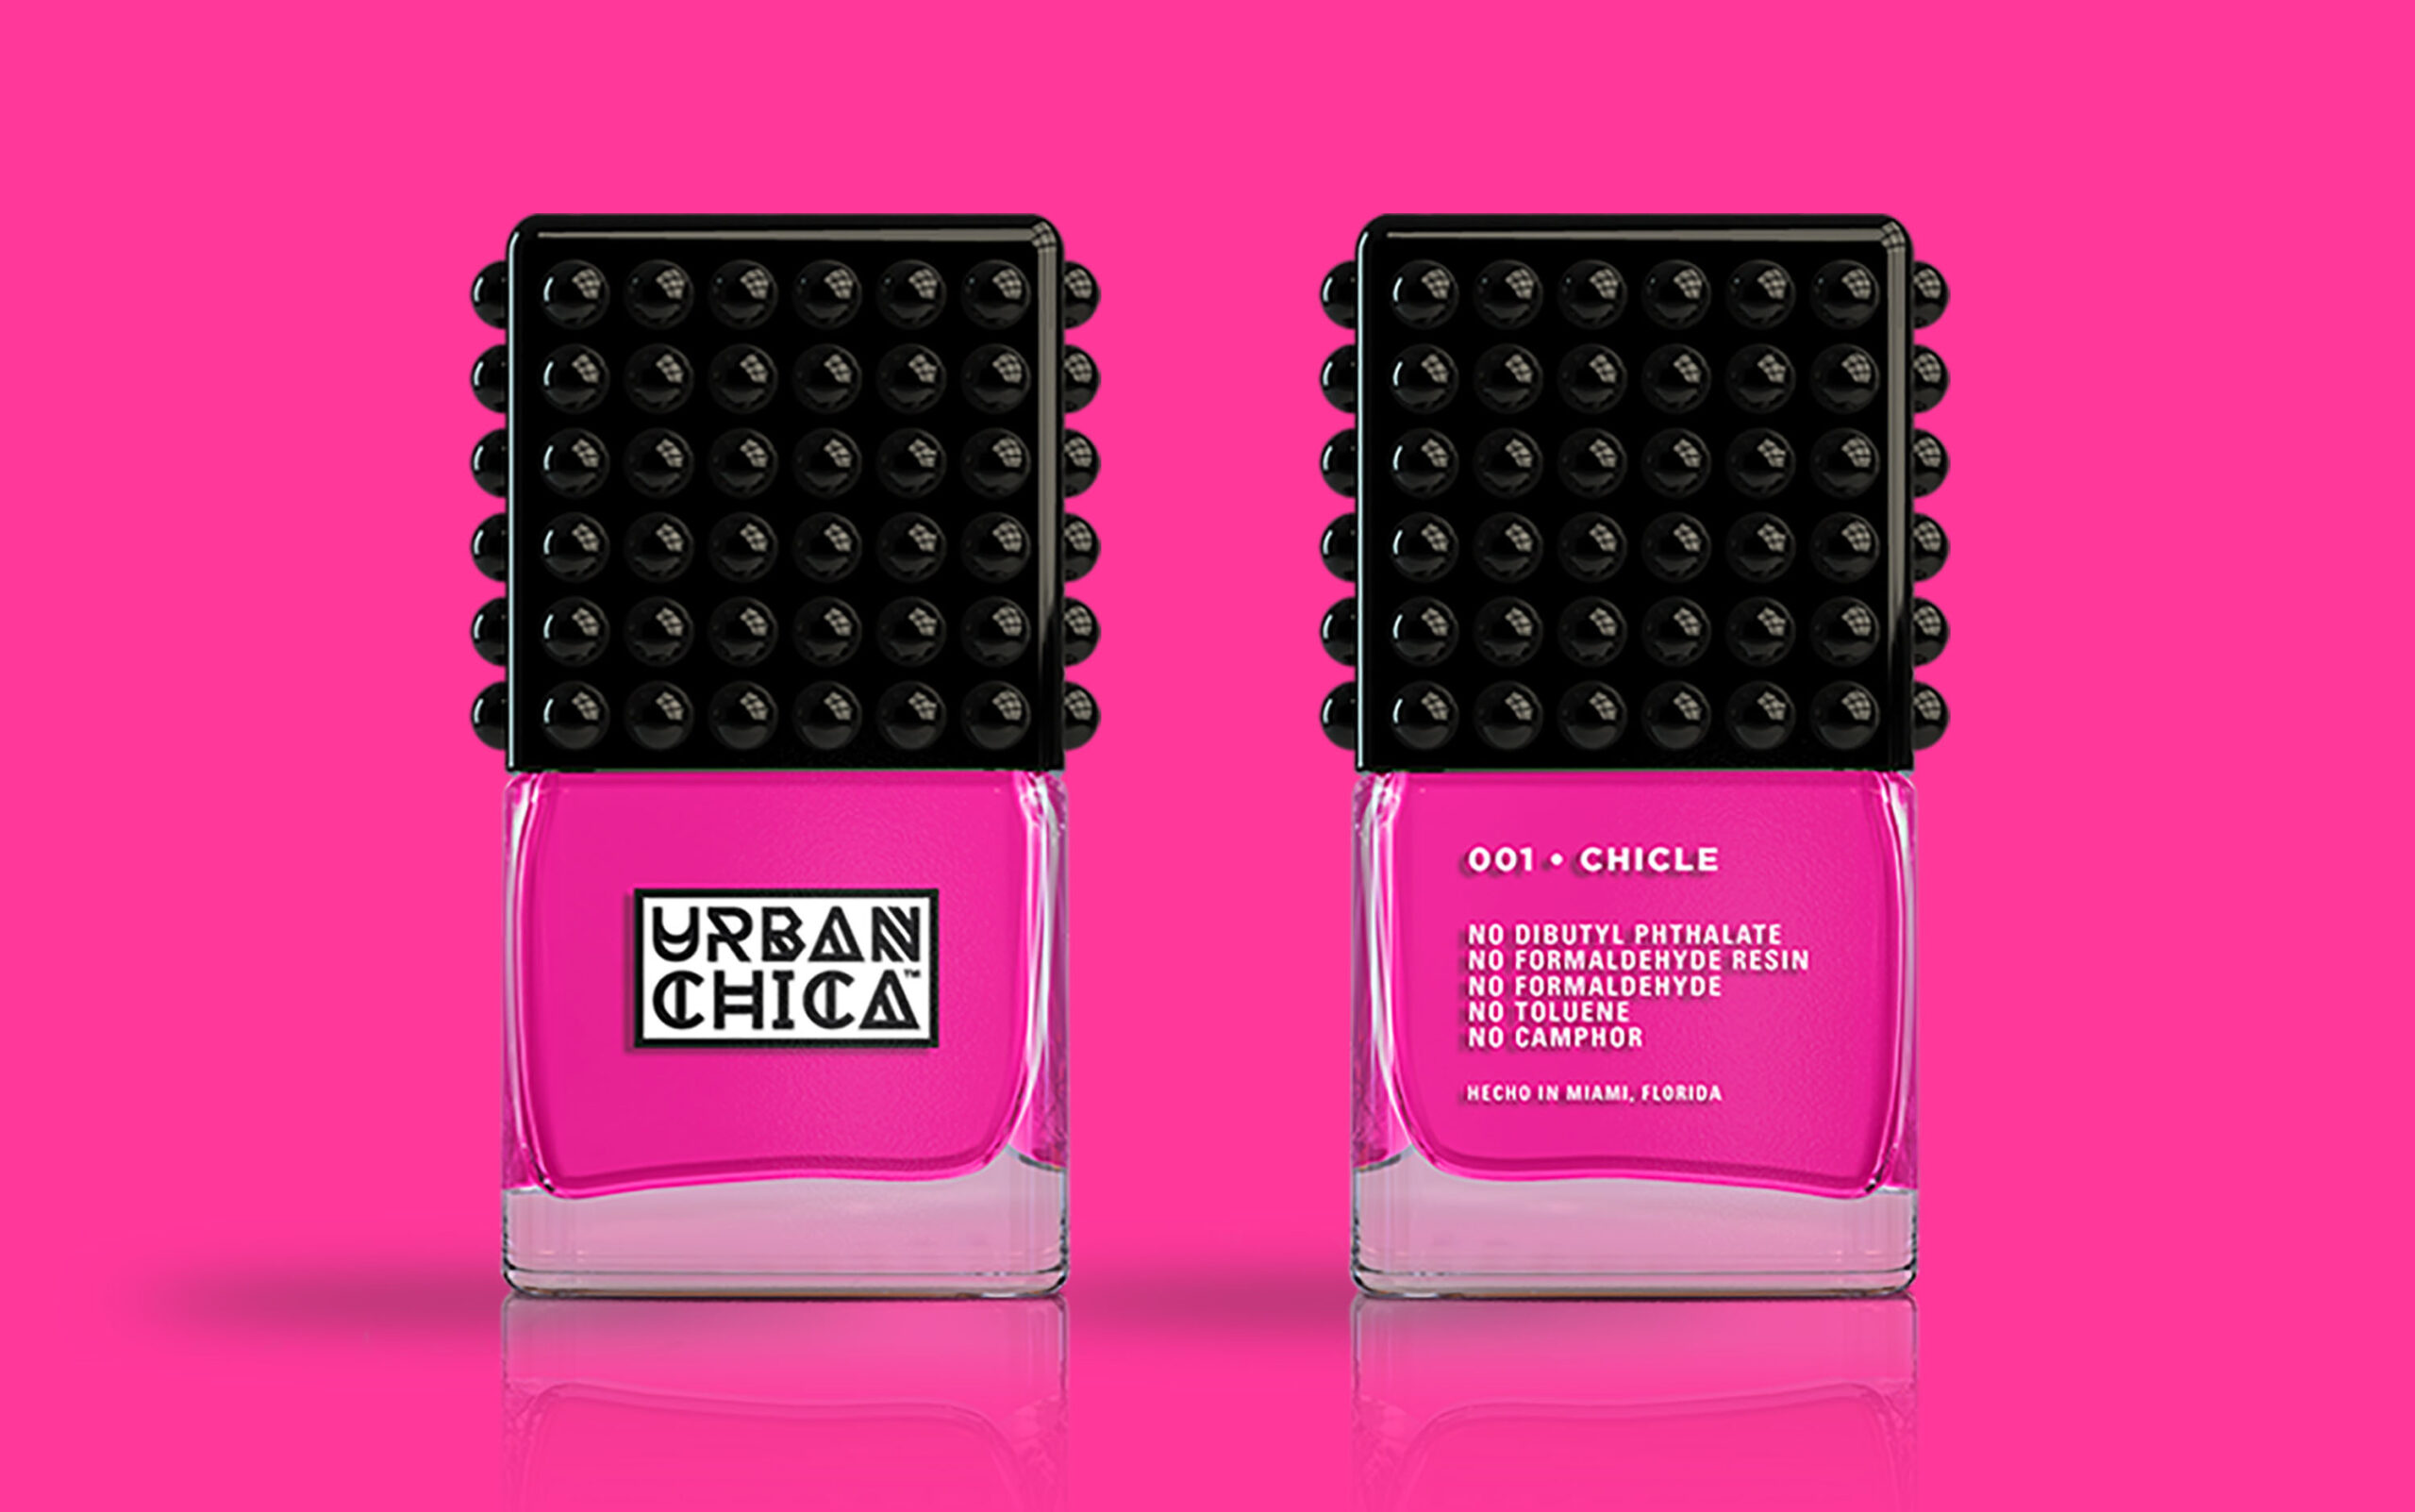 Latino makeup design and branding for Urban Chica